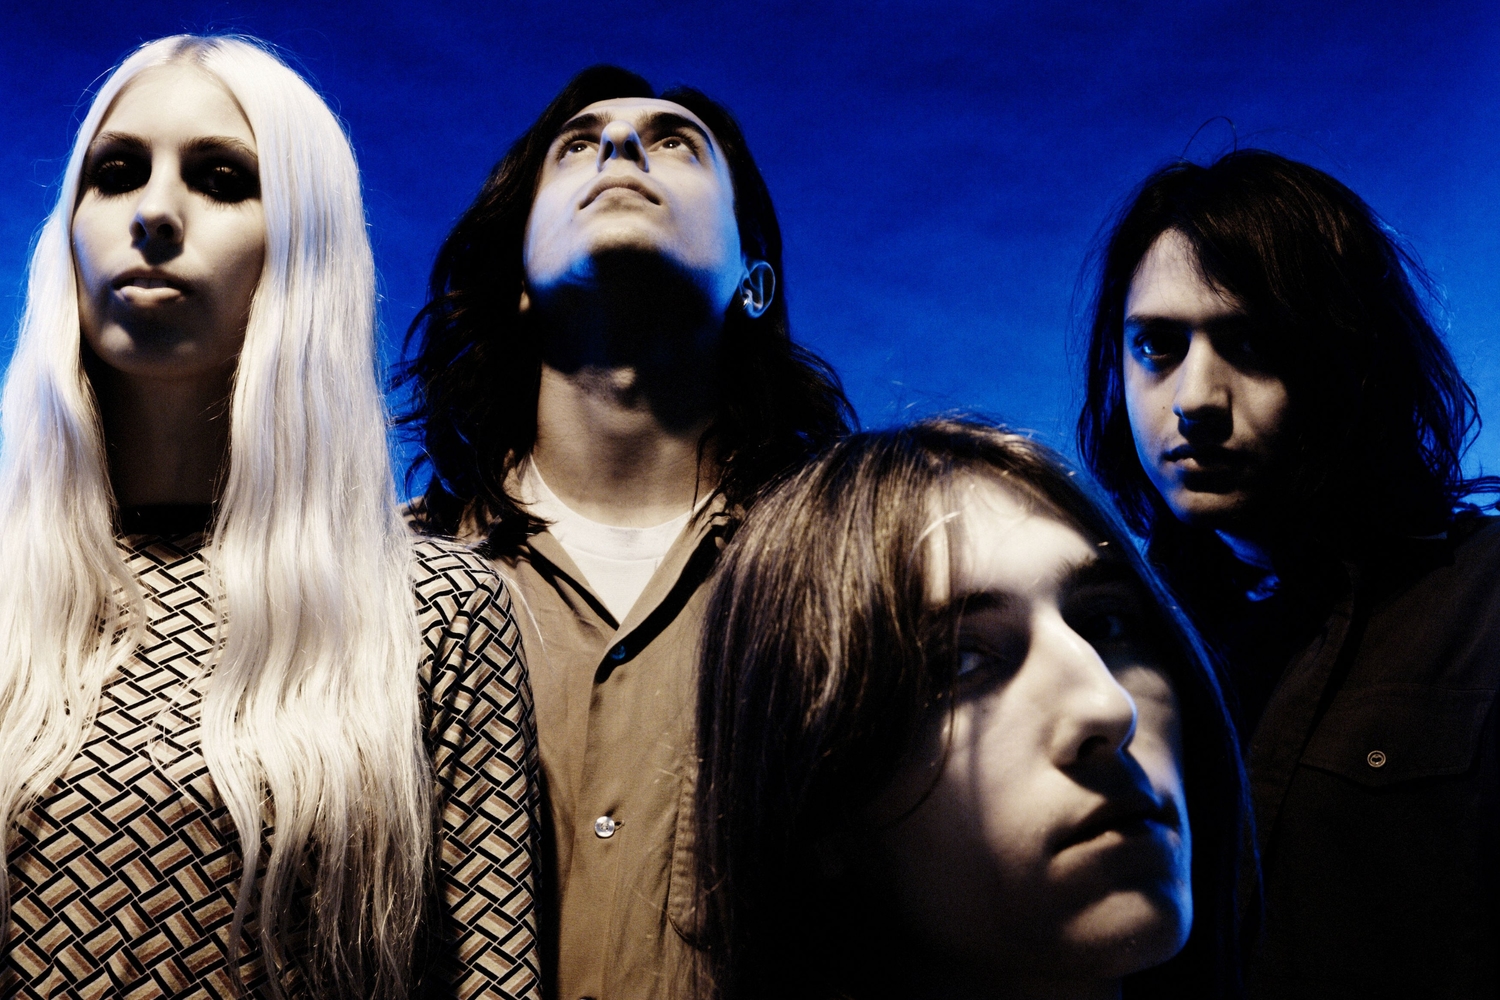 INHEAVEN: “Let’s make that band up - the one we’re waiting for, the one we want”